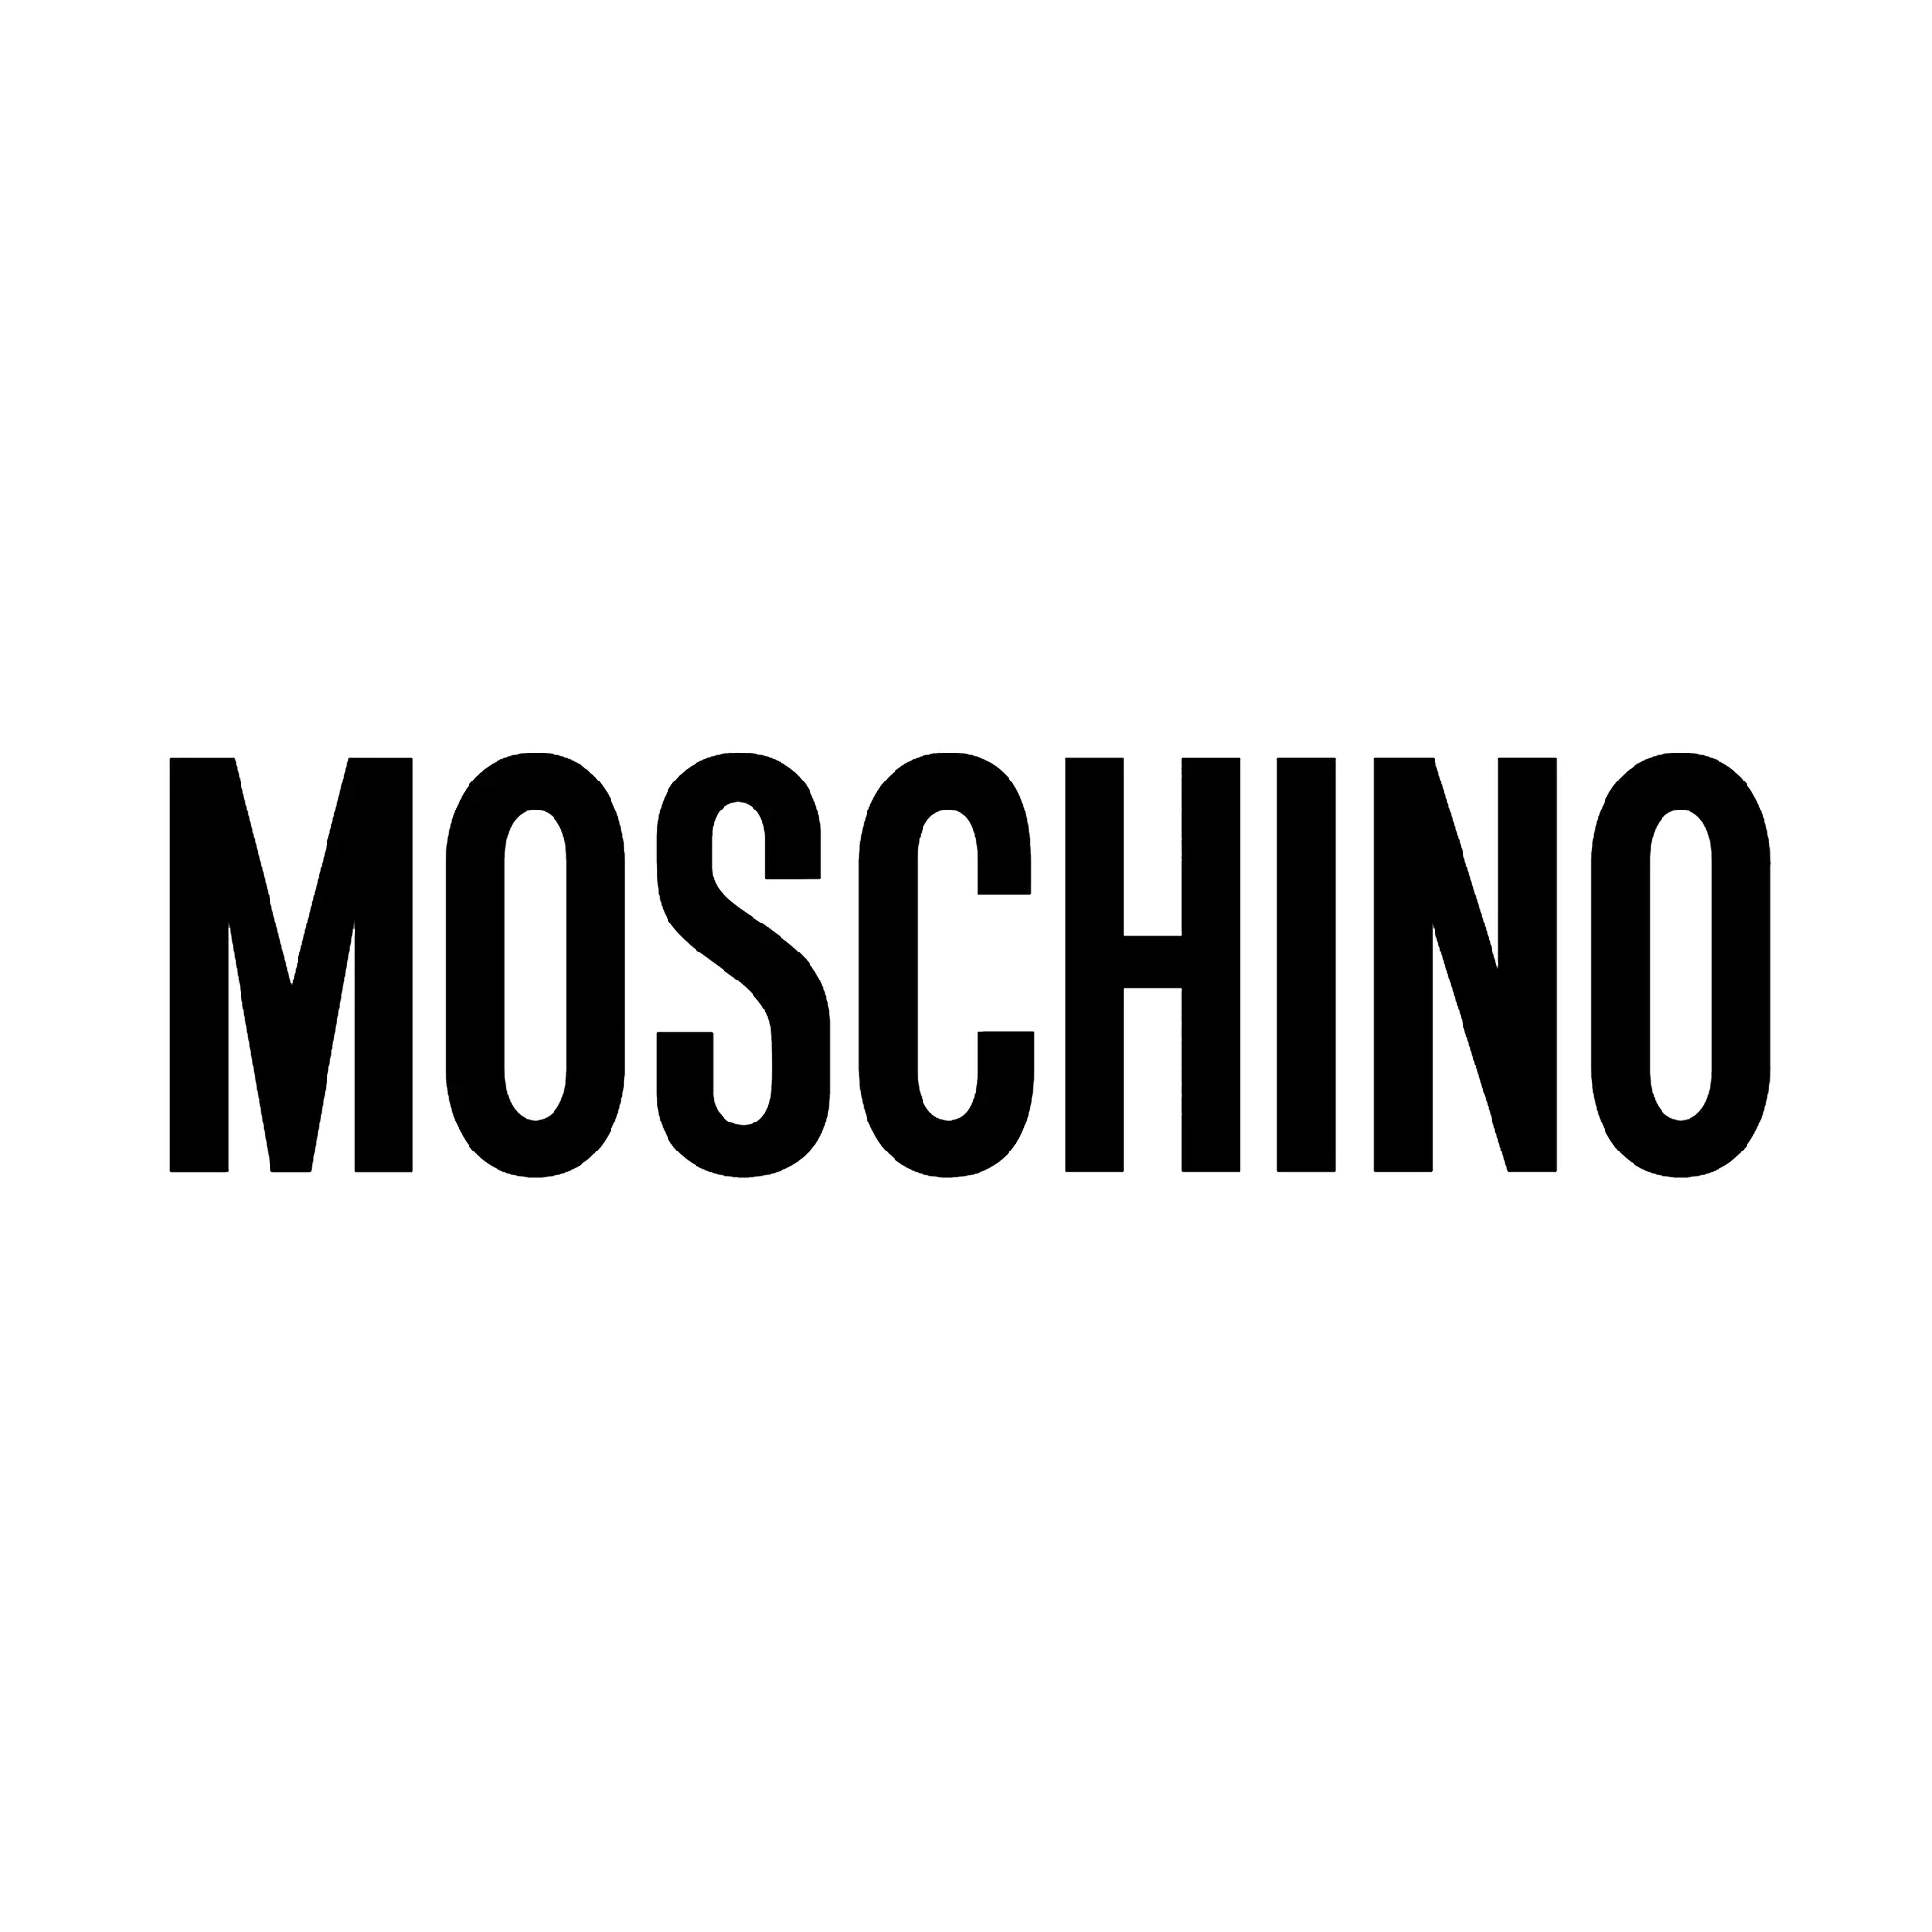 Moschino I Love Love EDT | Femme Fatale - Femme Fatale - 